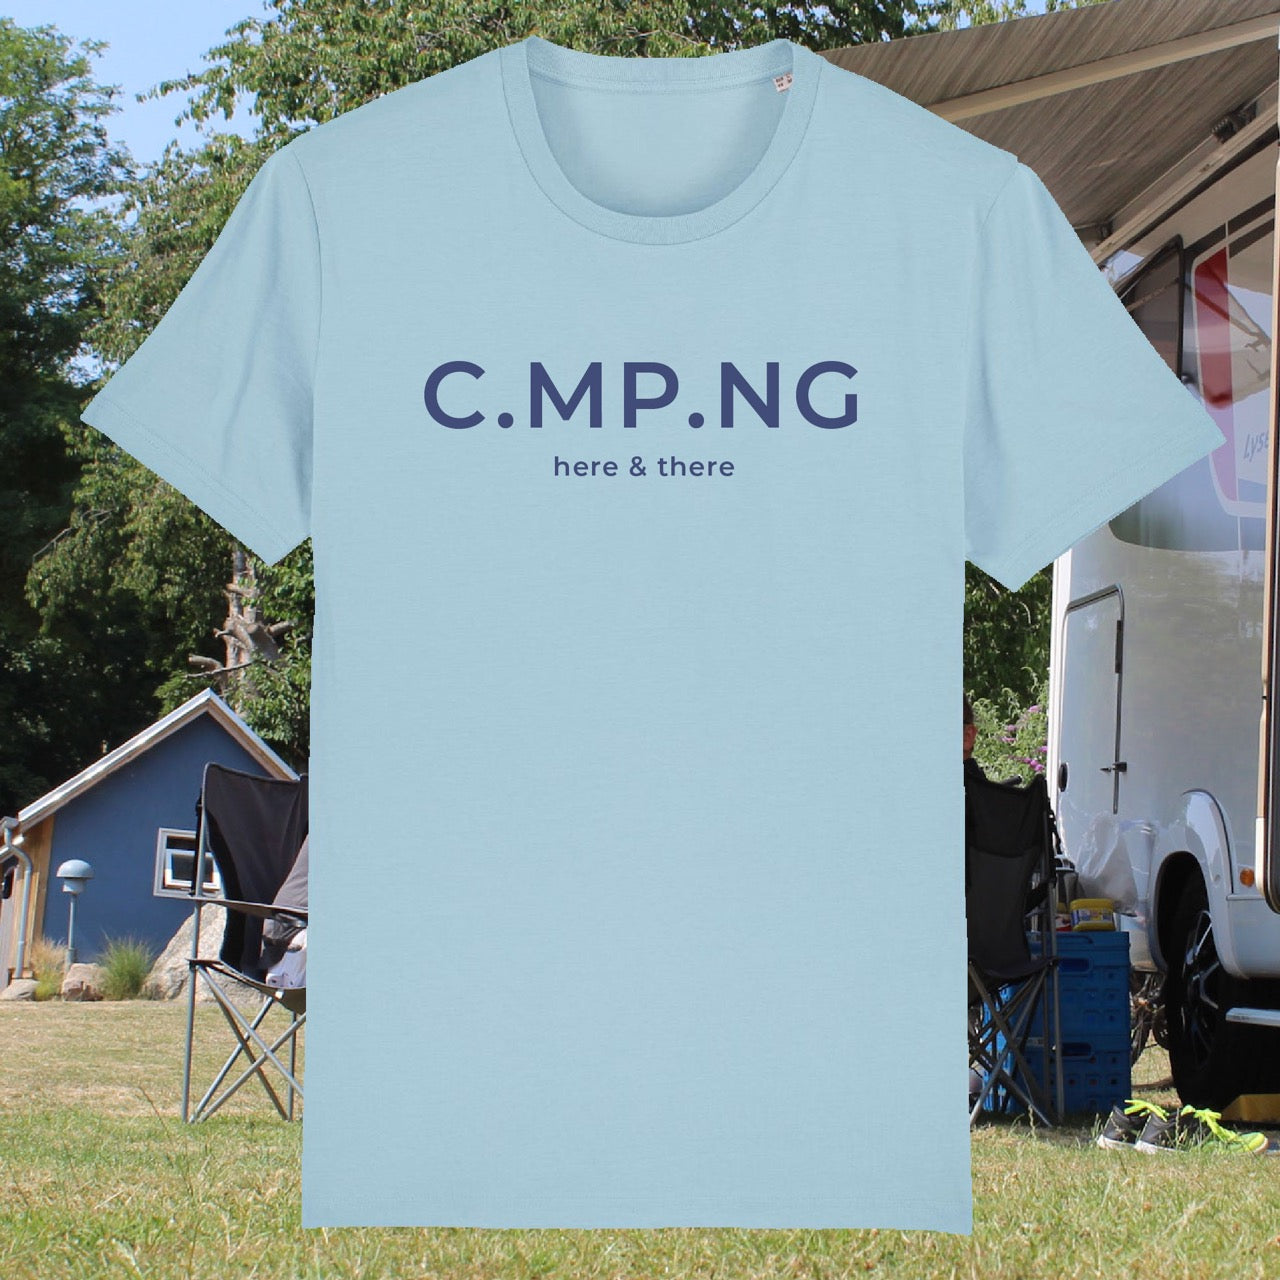 Camping T-Shirt in hellblau mit dunkelblauem Print C.MP.NG here & there